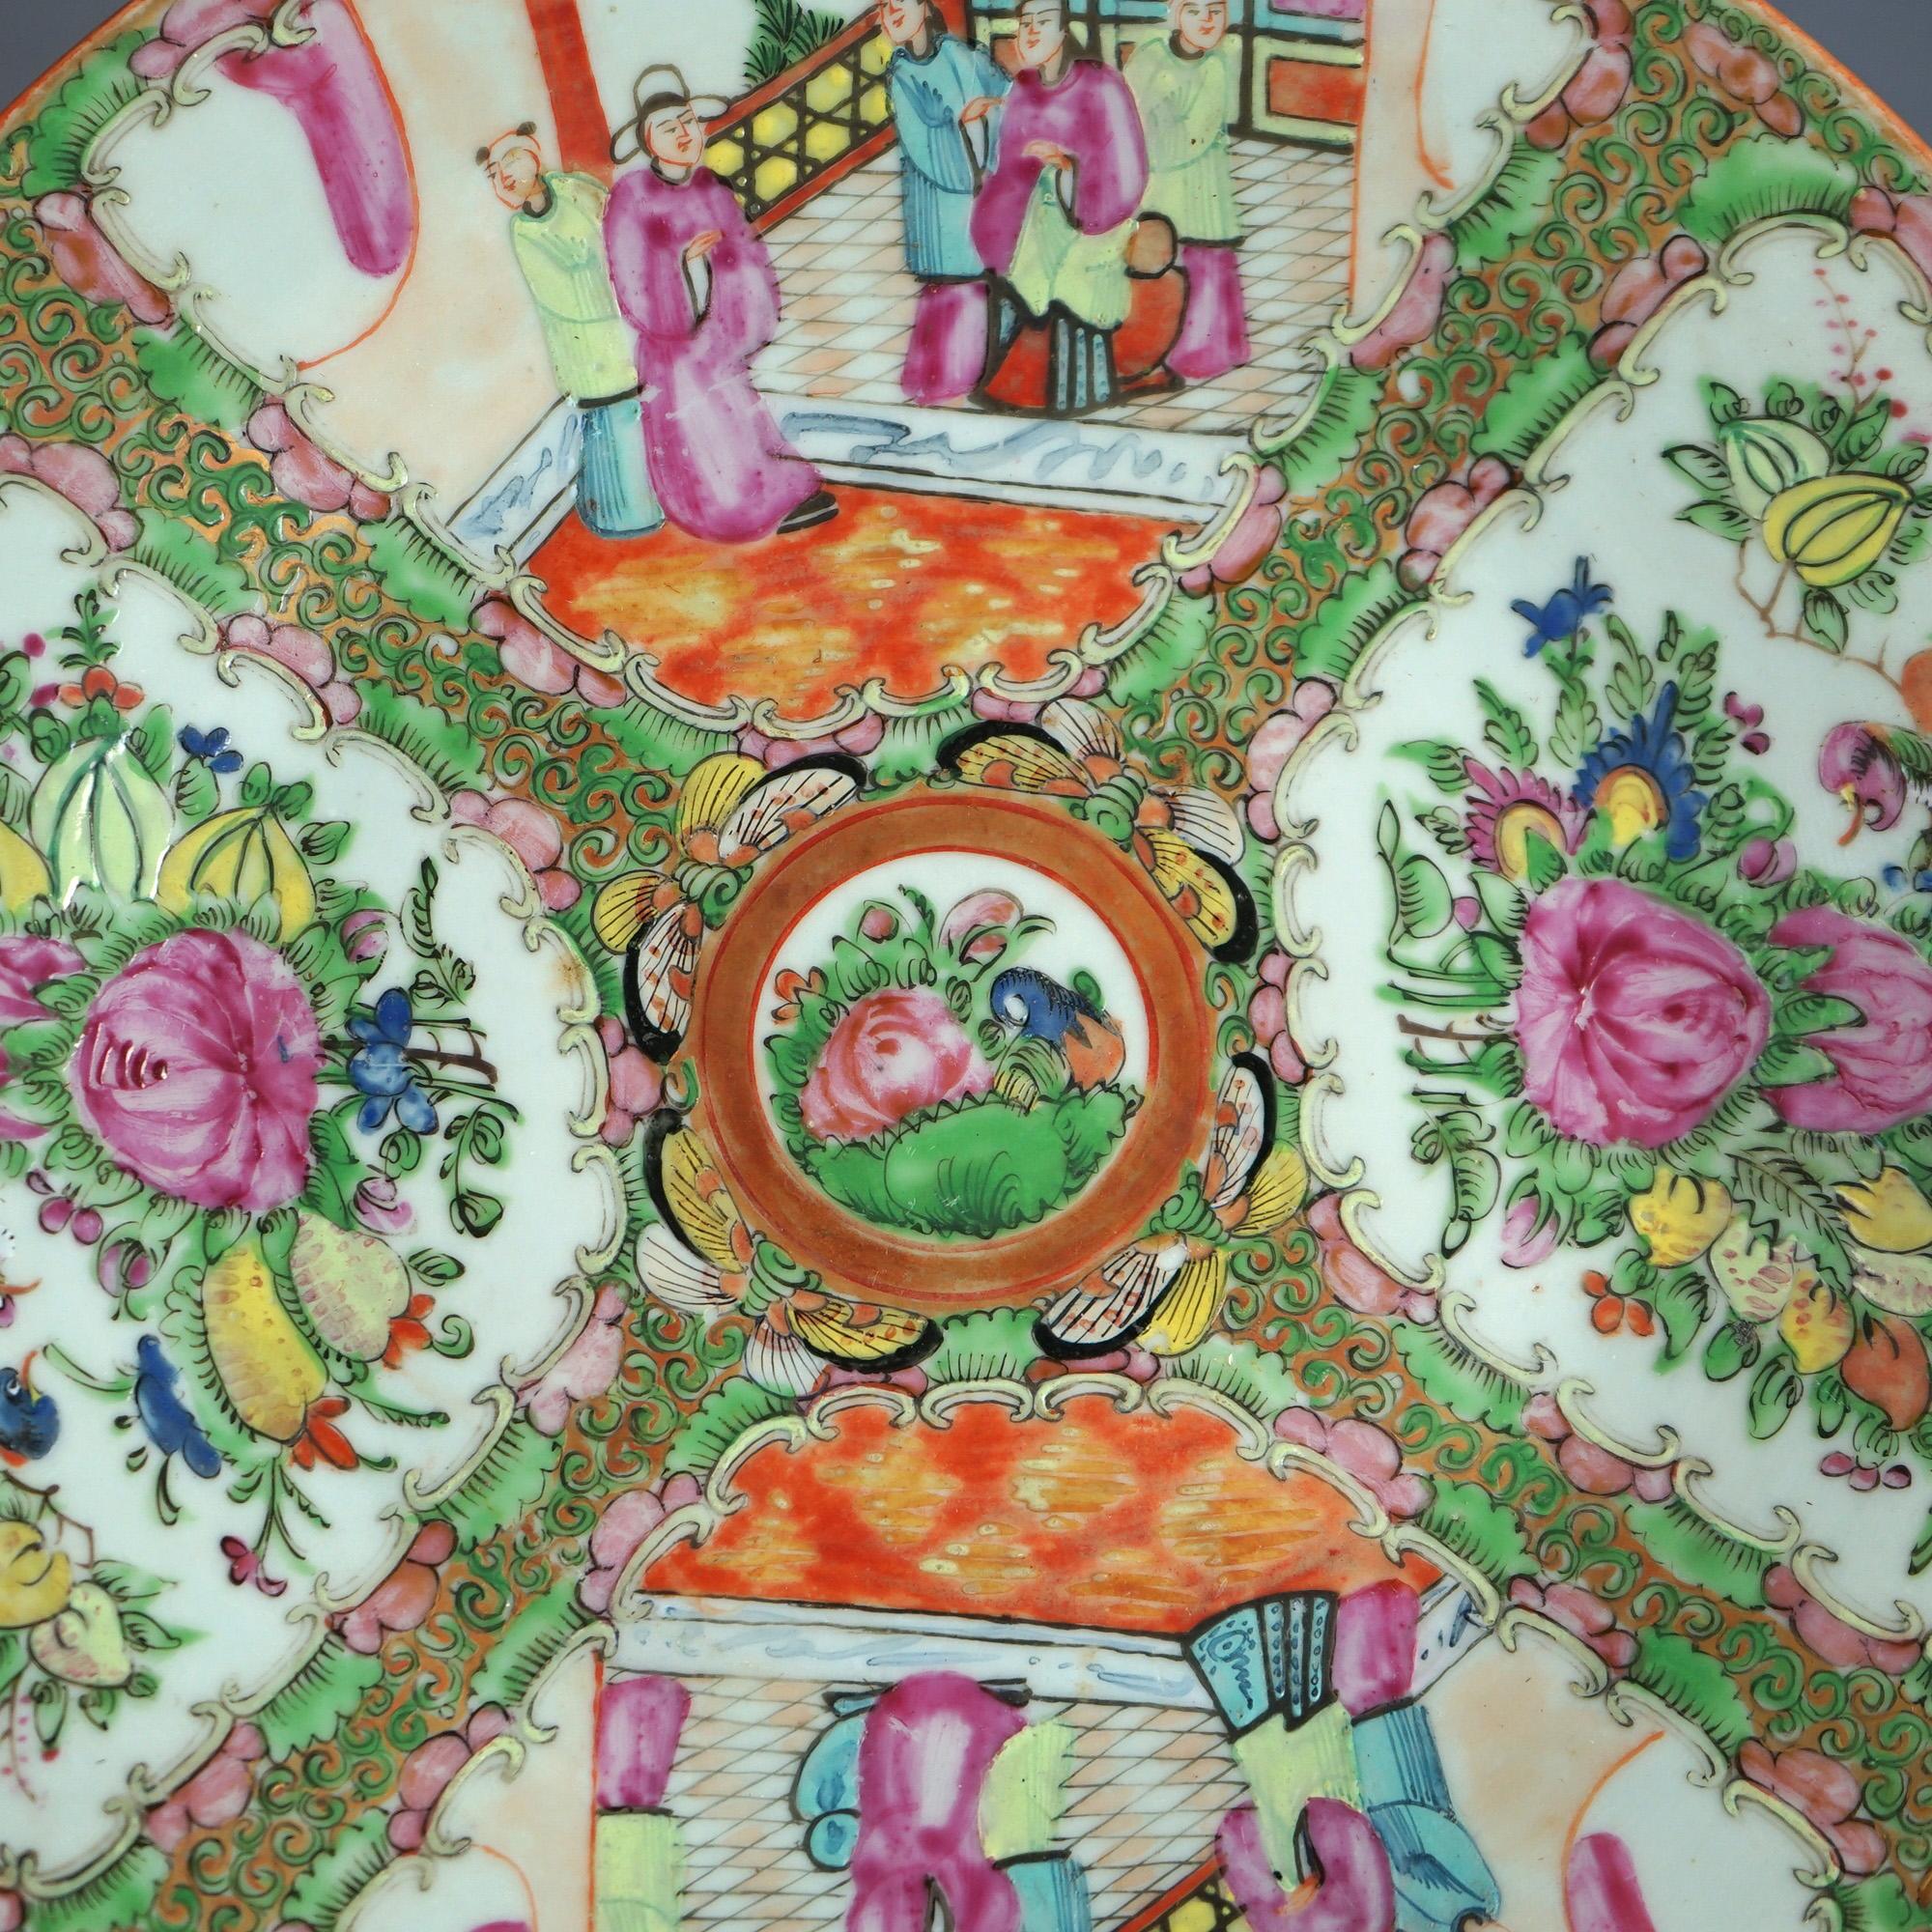 20th Century Antique Chinese Rose Medallion Porcelain Charger with Gardens & Figures C1900 For Sale